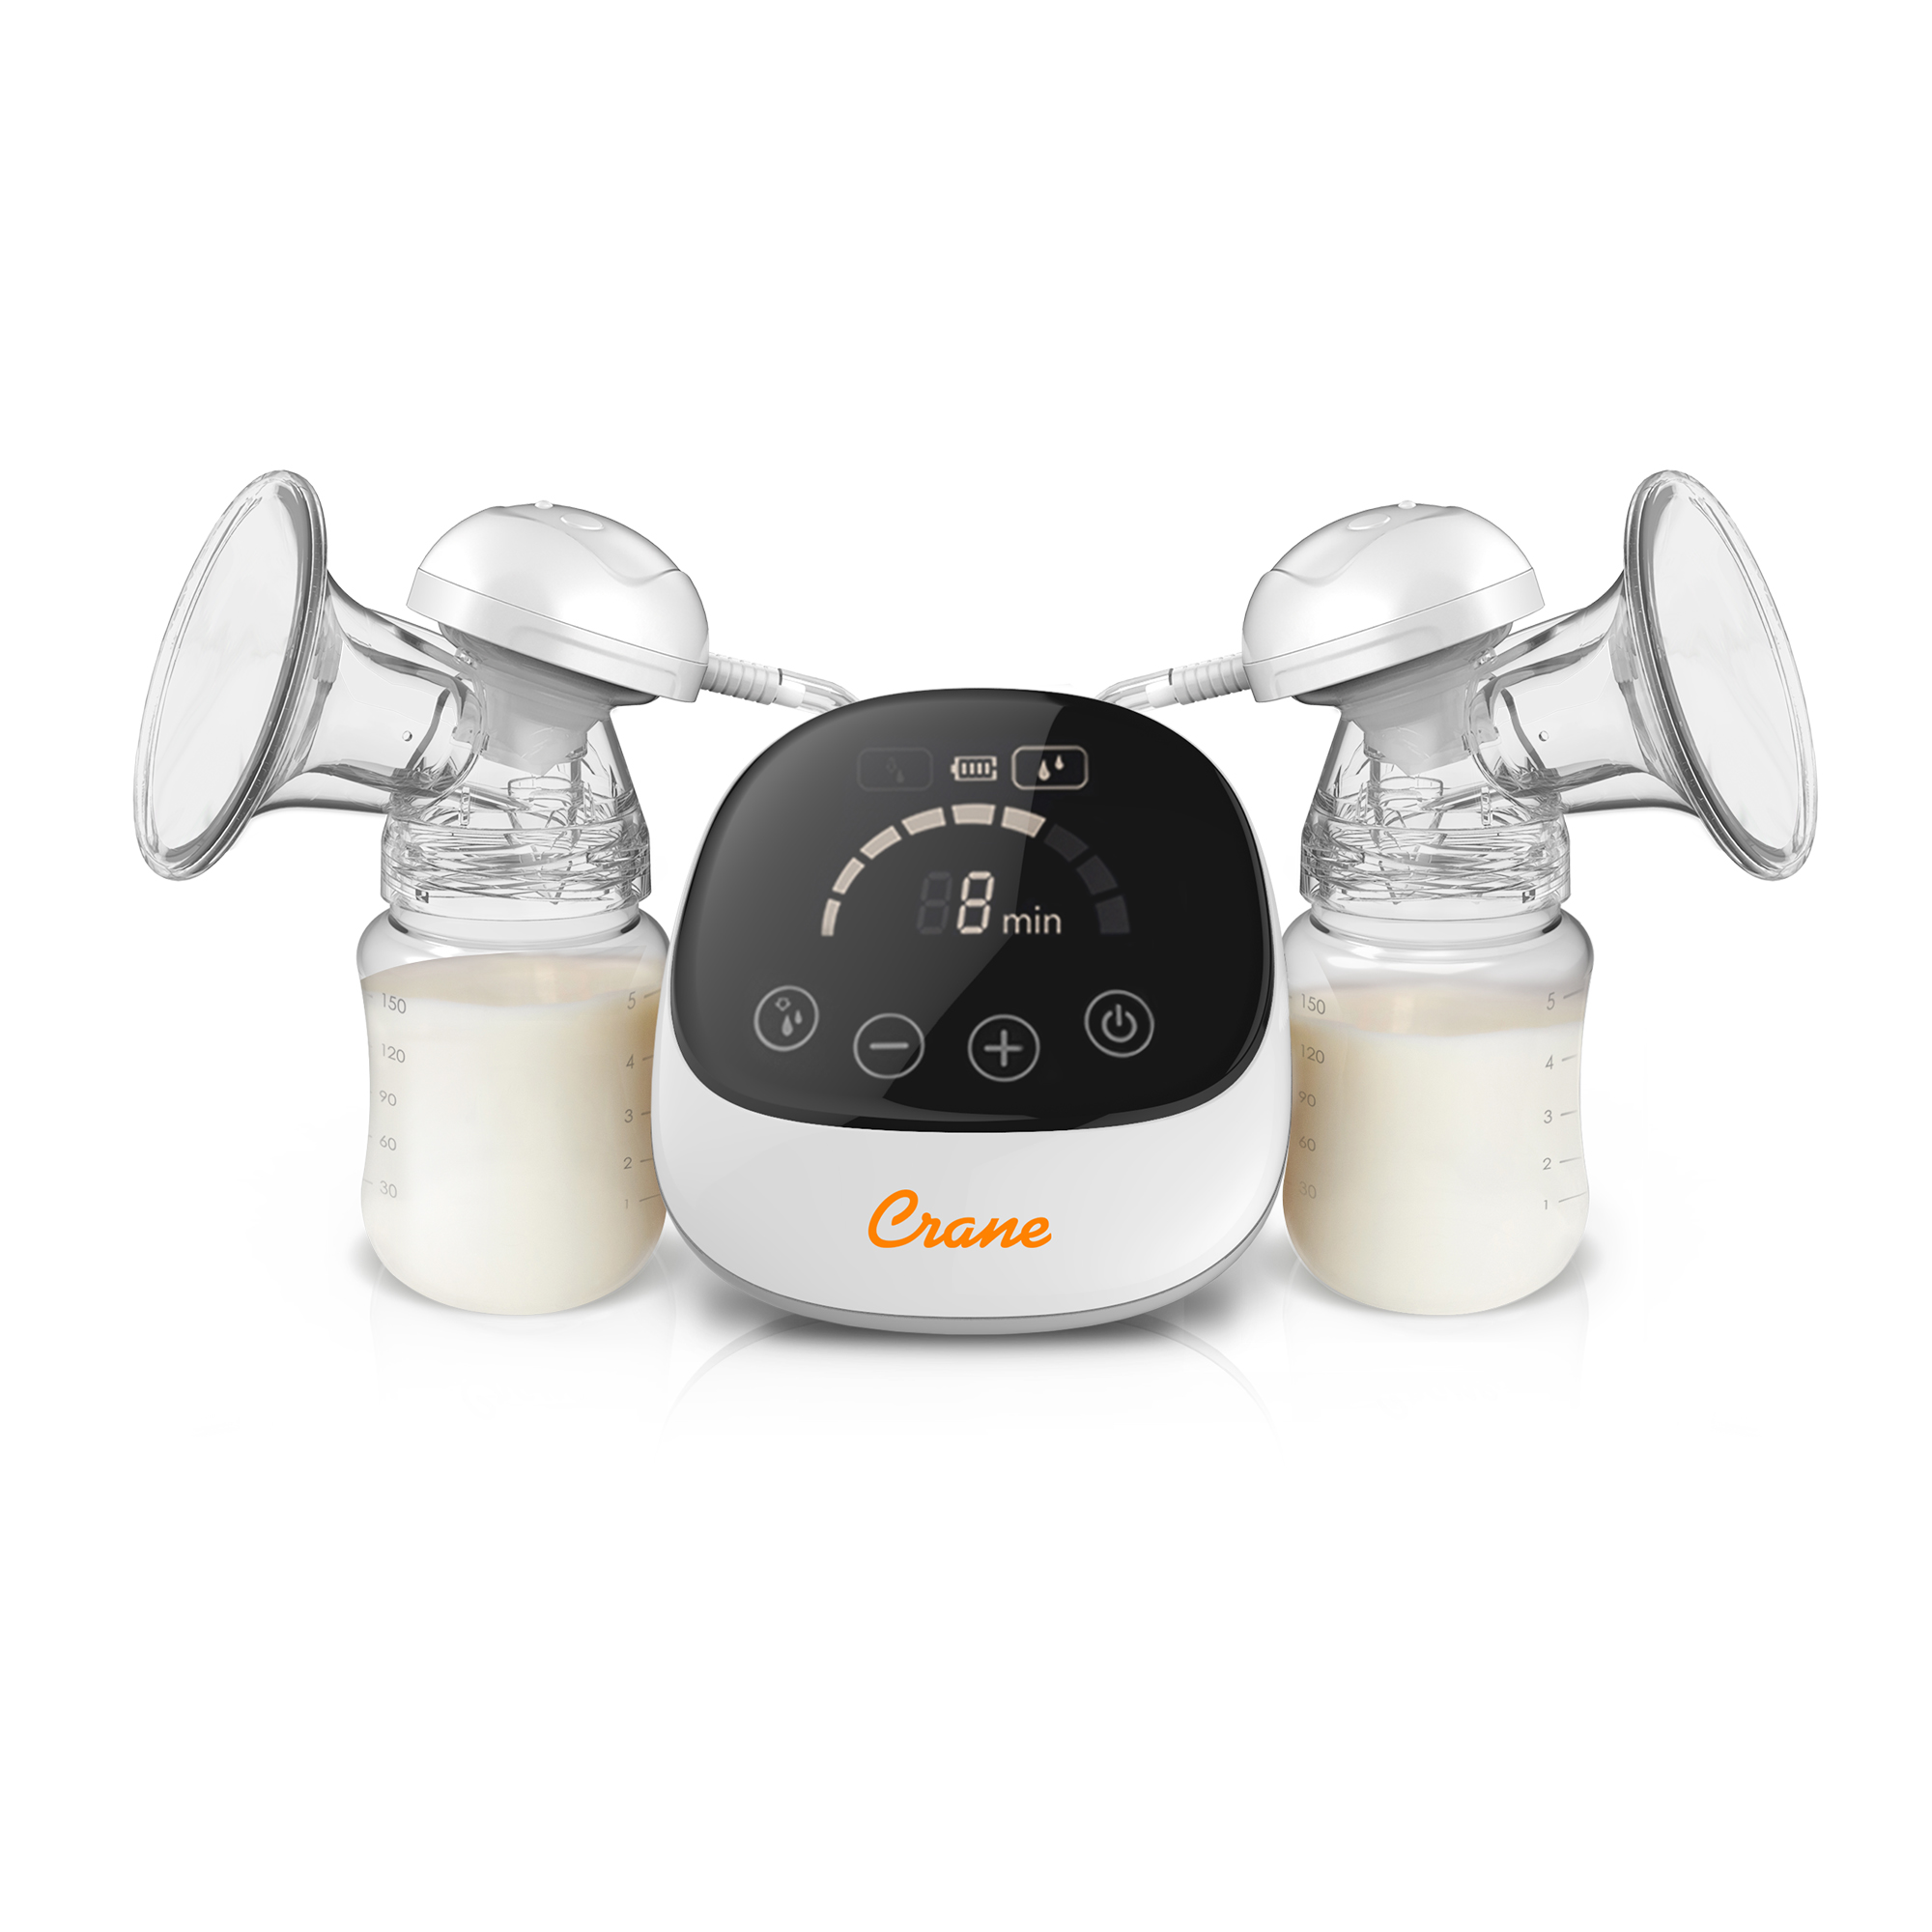 Breast pump image on white background